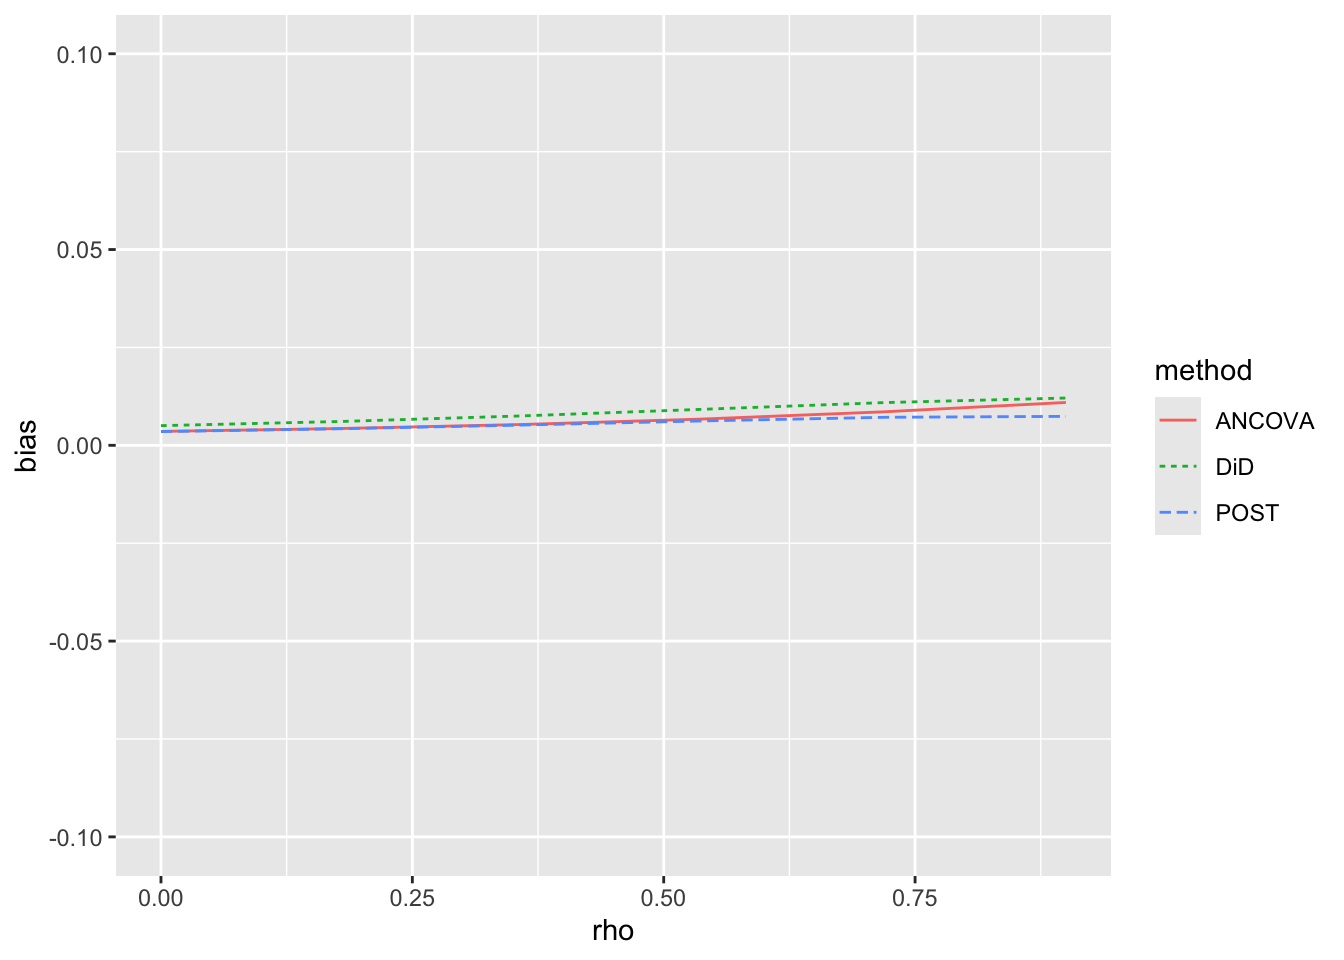 Bias as a function of rho parameter. Plot shows only modest amounts of bias (plausibly consistent with no bias) with no discernible difference between the three methods considered. For each method, the line is close to horizontal and below 0.02.